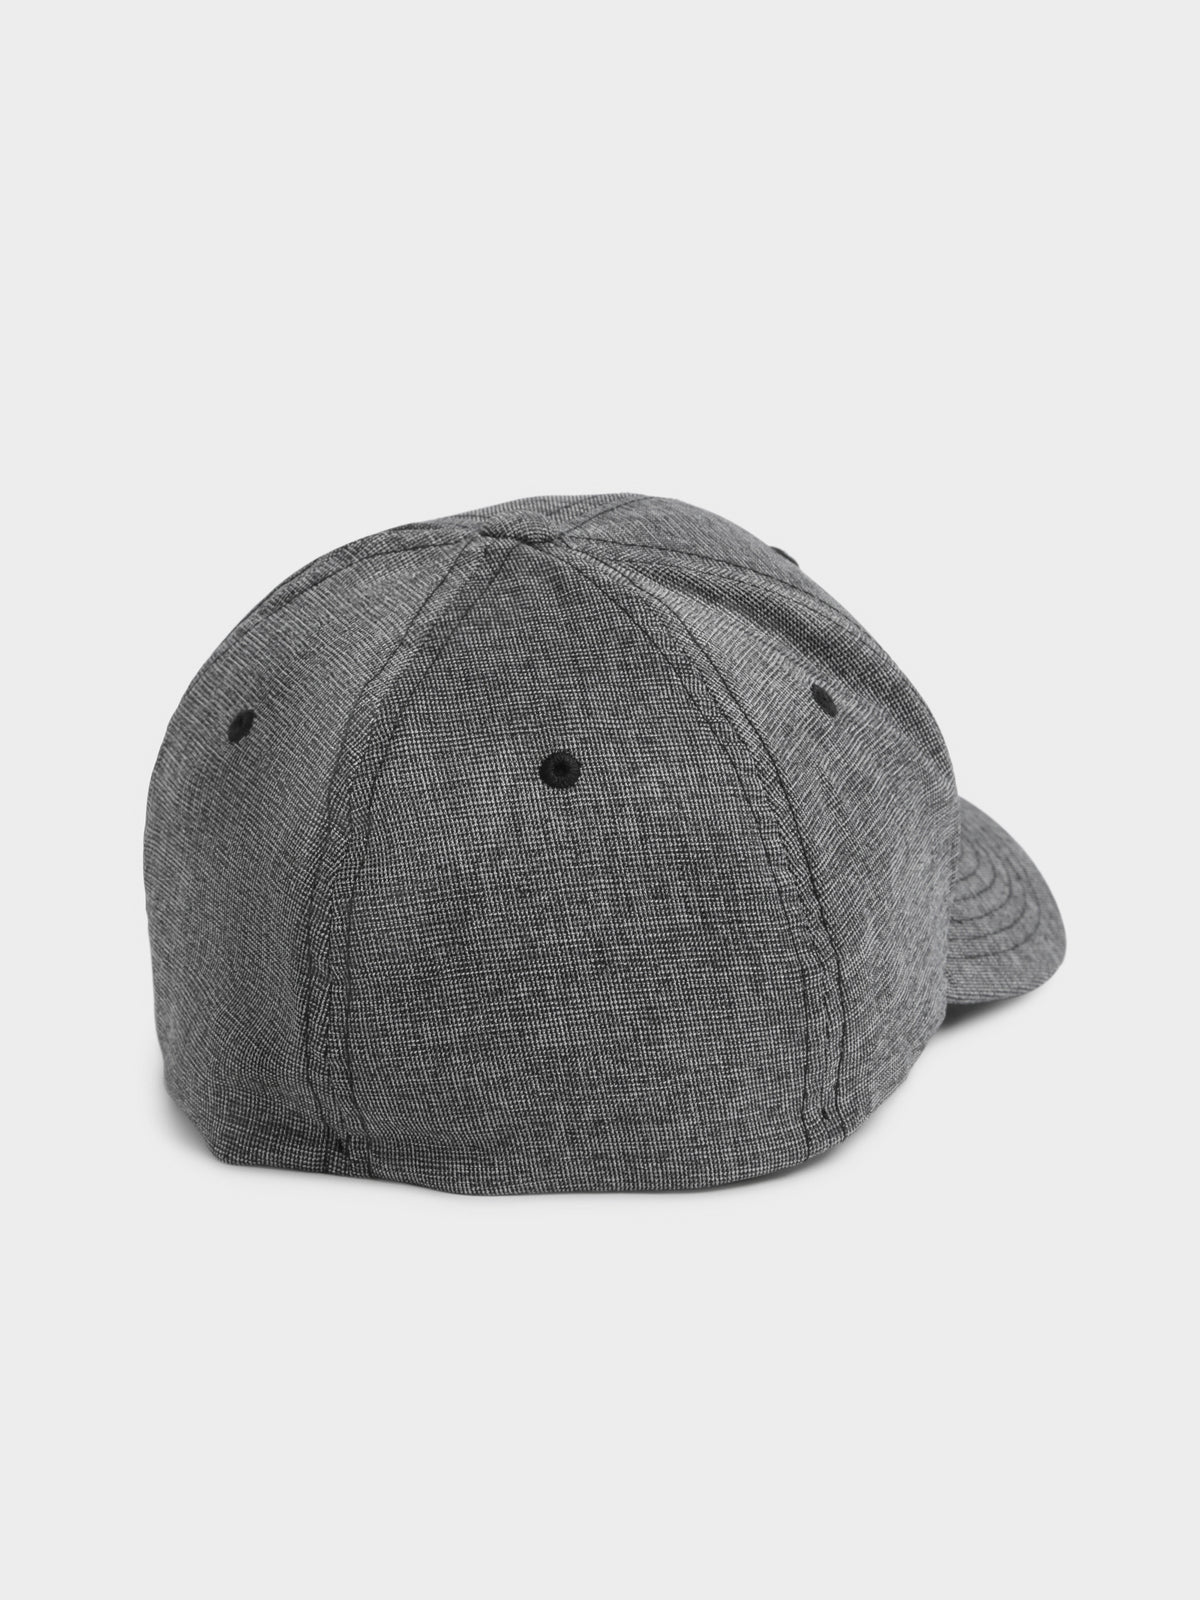 Cool and Dry Chambray Cap in Grey